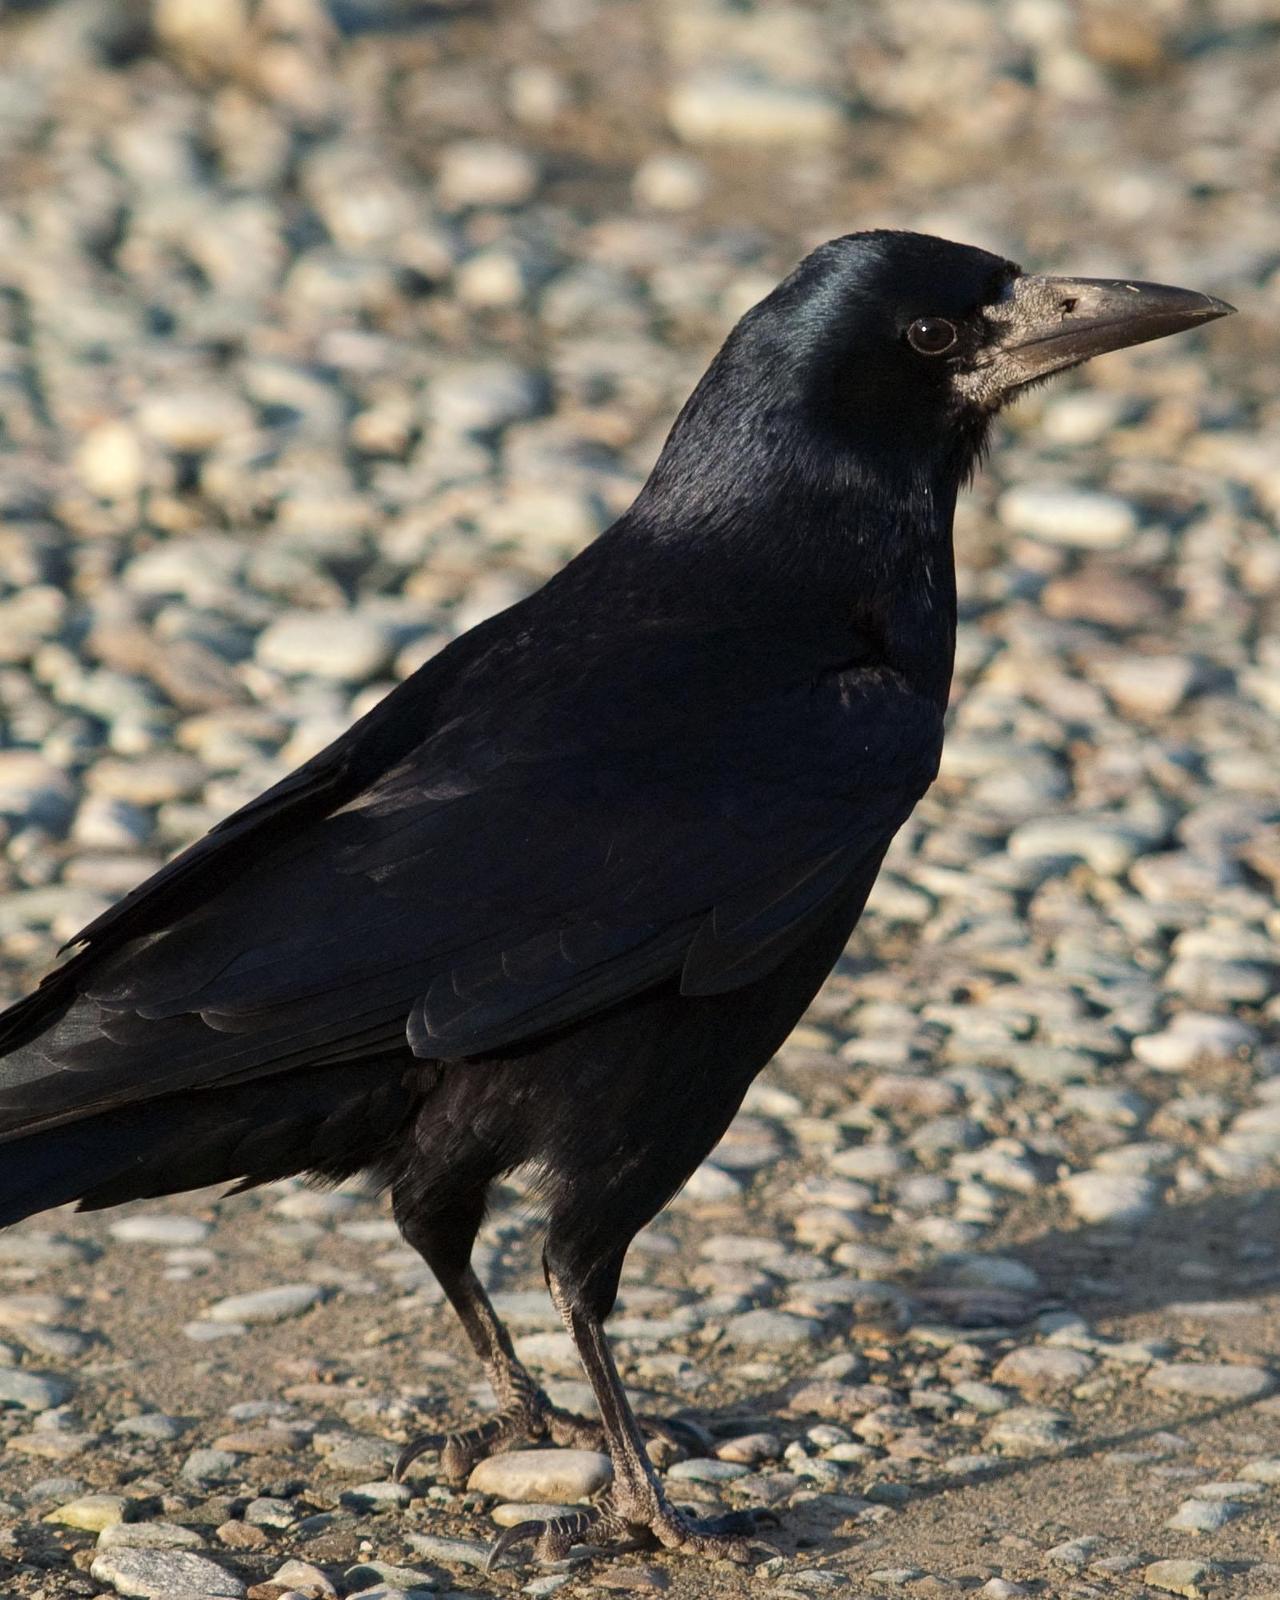 Rook Photo by Steve Percival